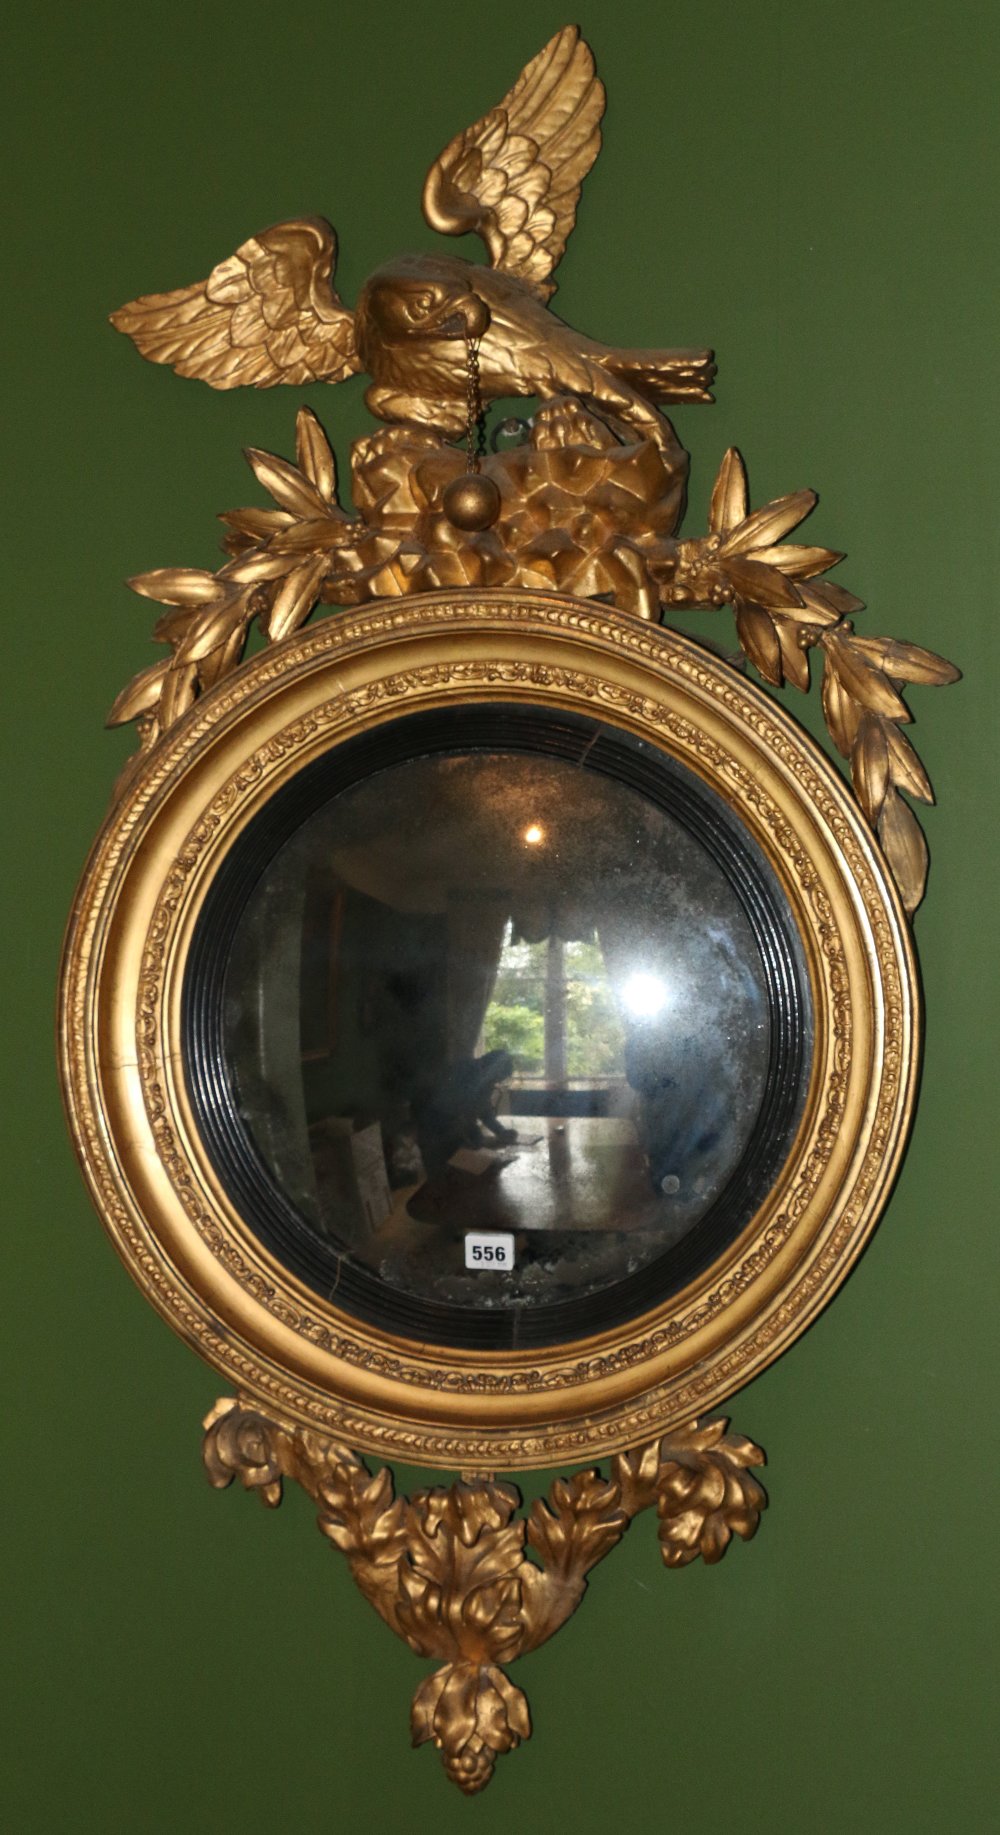 Regency gilt gesso convex wall mirror with eagle and foliate crest above a moulded frame and